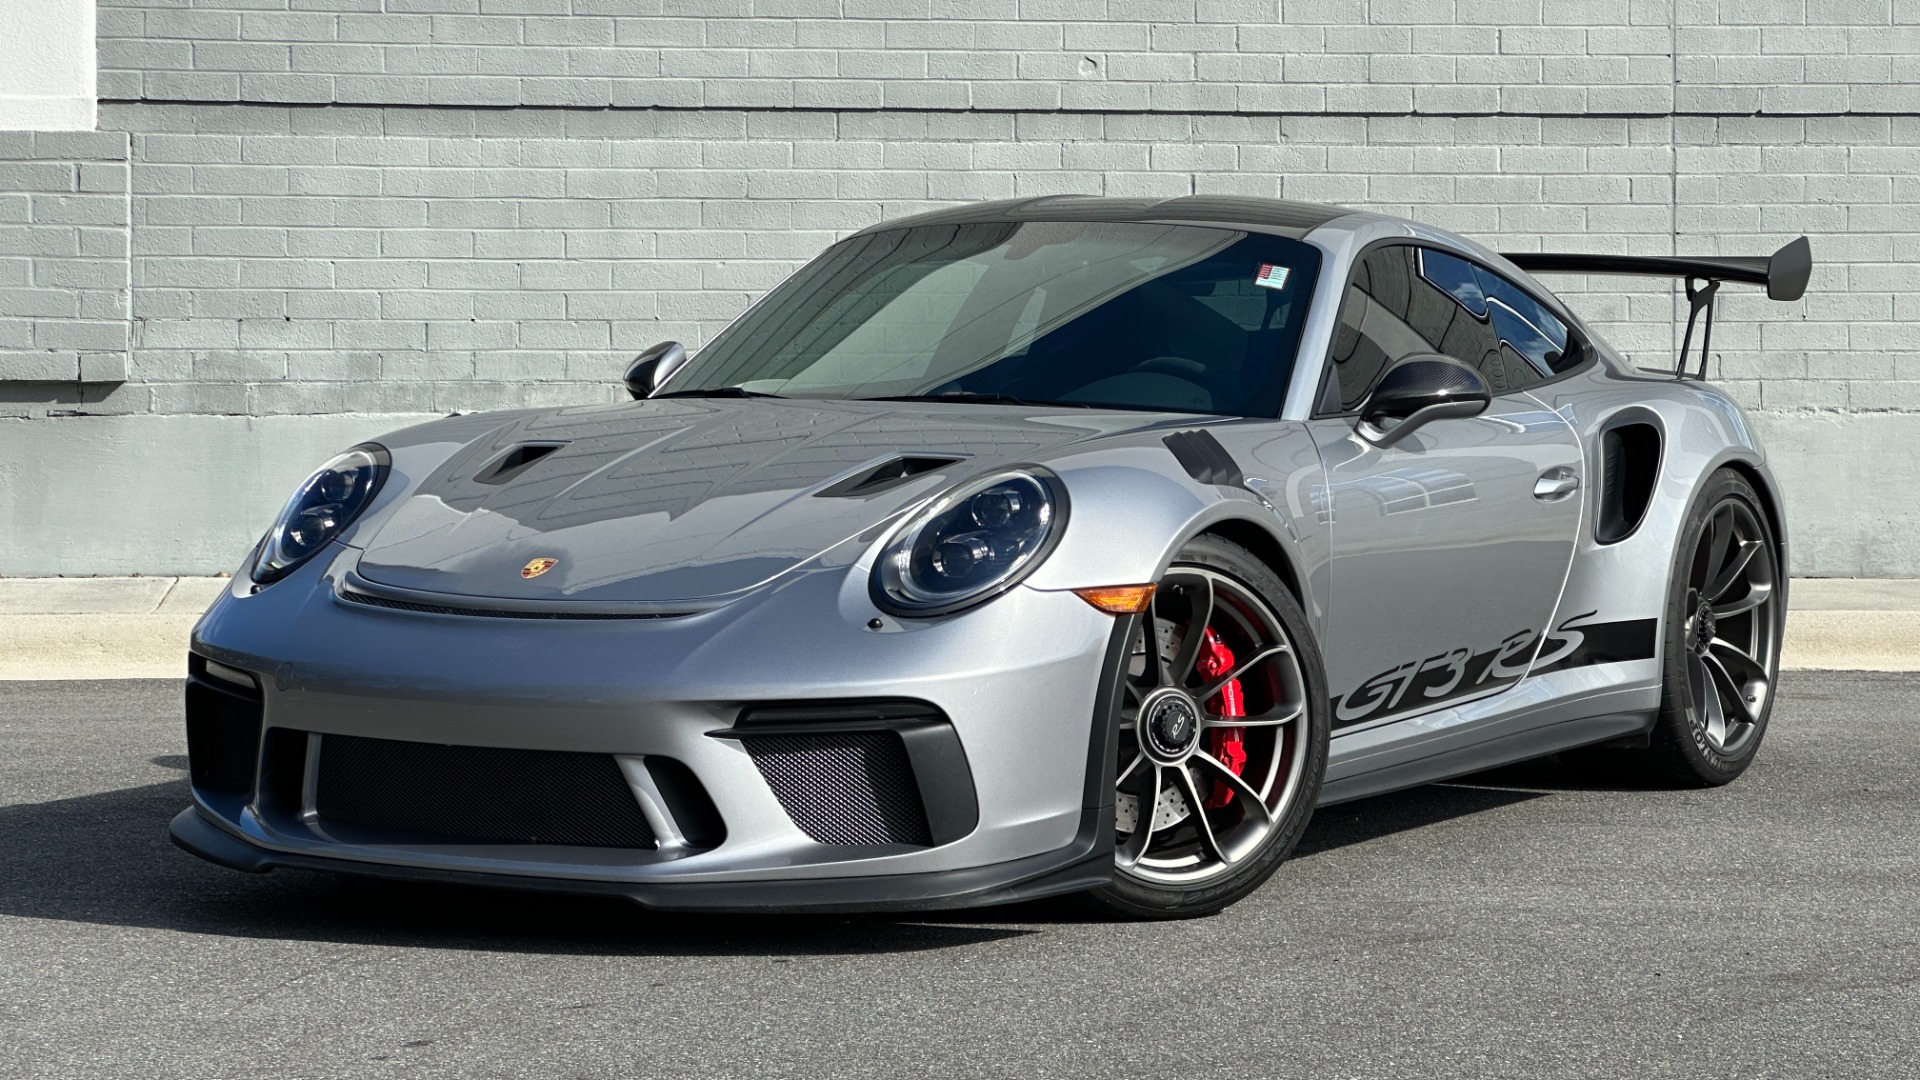 Used 2019 Porsche 911 GT3 RS WEISSACH / FULL XPEL PPF / DUNDON HEADERS / EXHAUST / FRONT LIFT for sale $248,999 at Formula Imports in Charlotte NC 28227 1